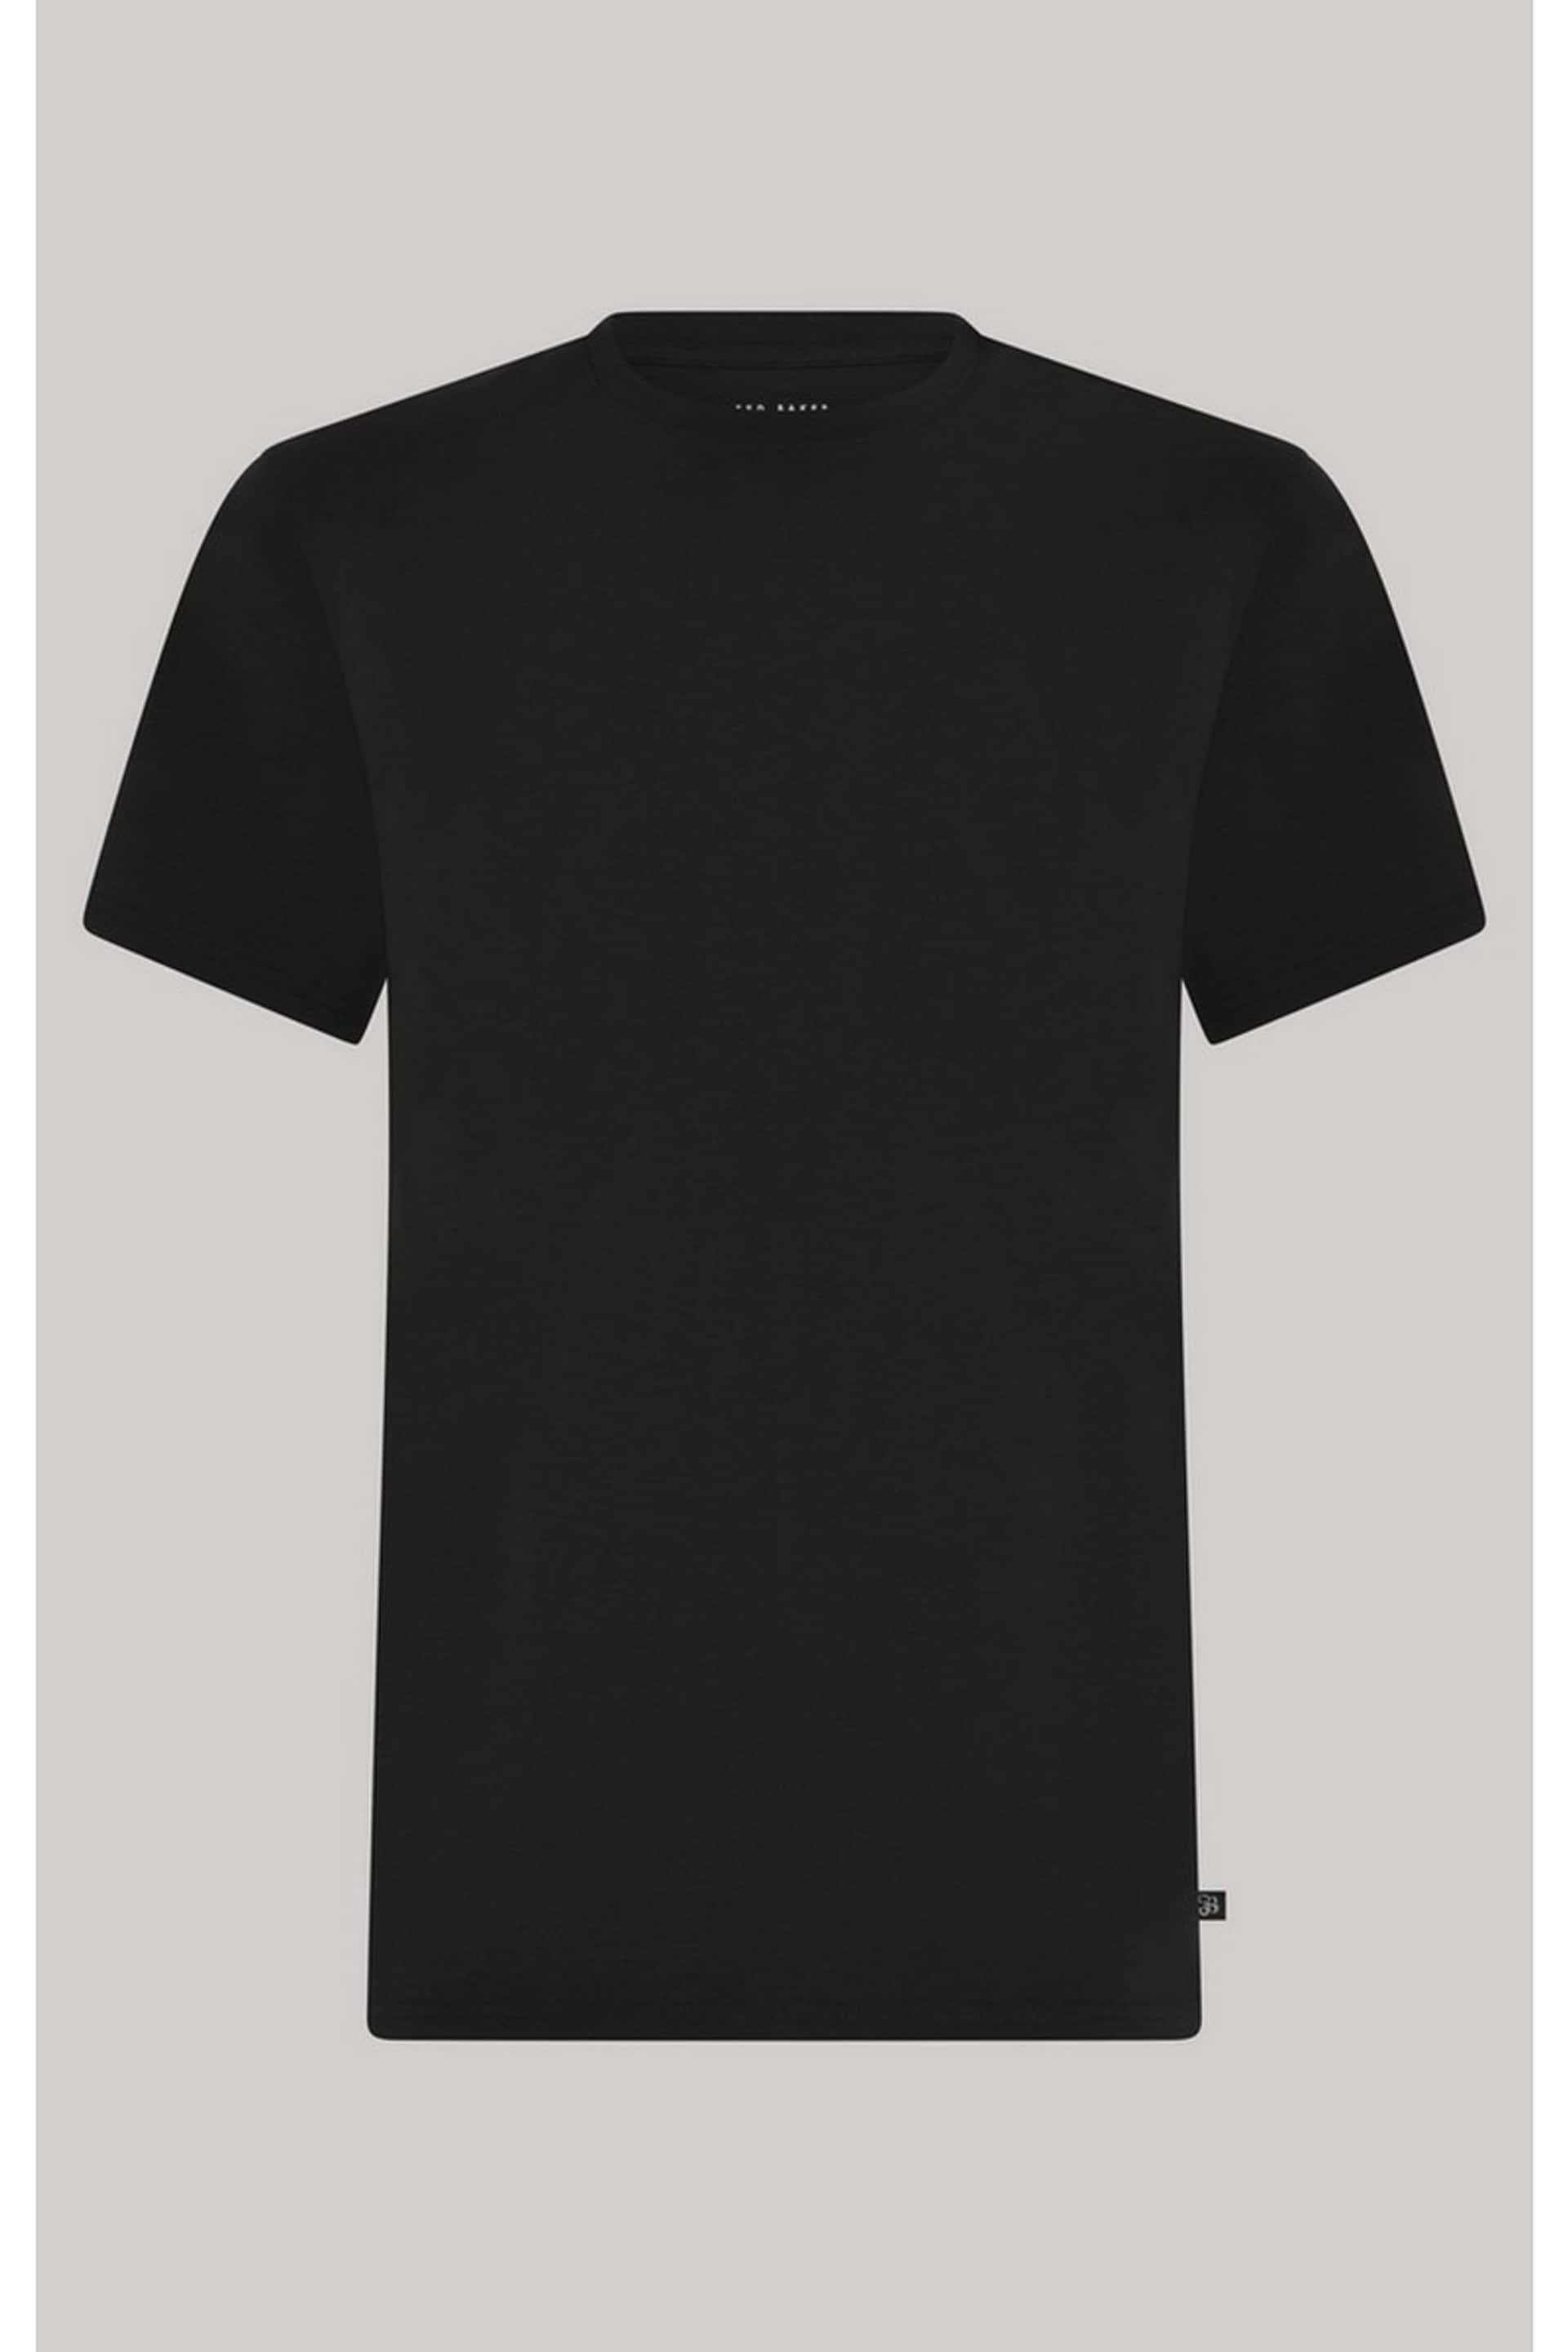 Ted Baker Black Crew Neck T-Shirts 3 Pack - Image 6 of 8